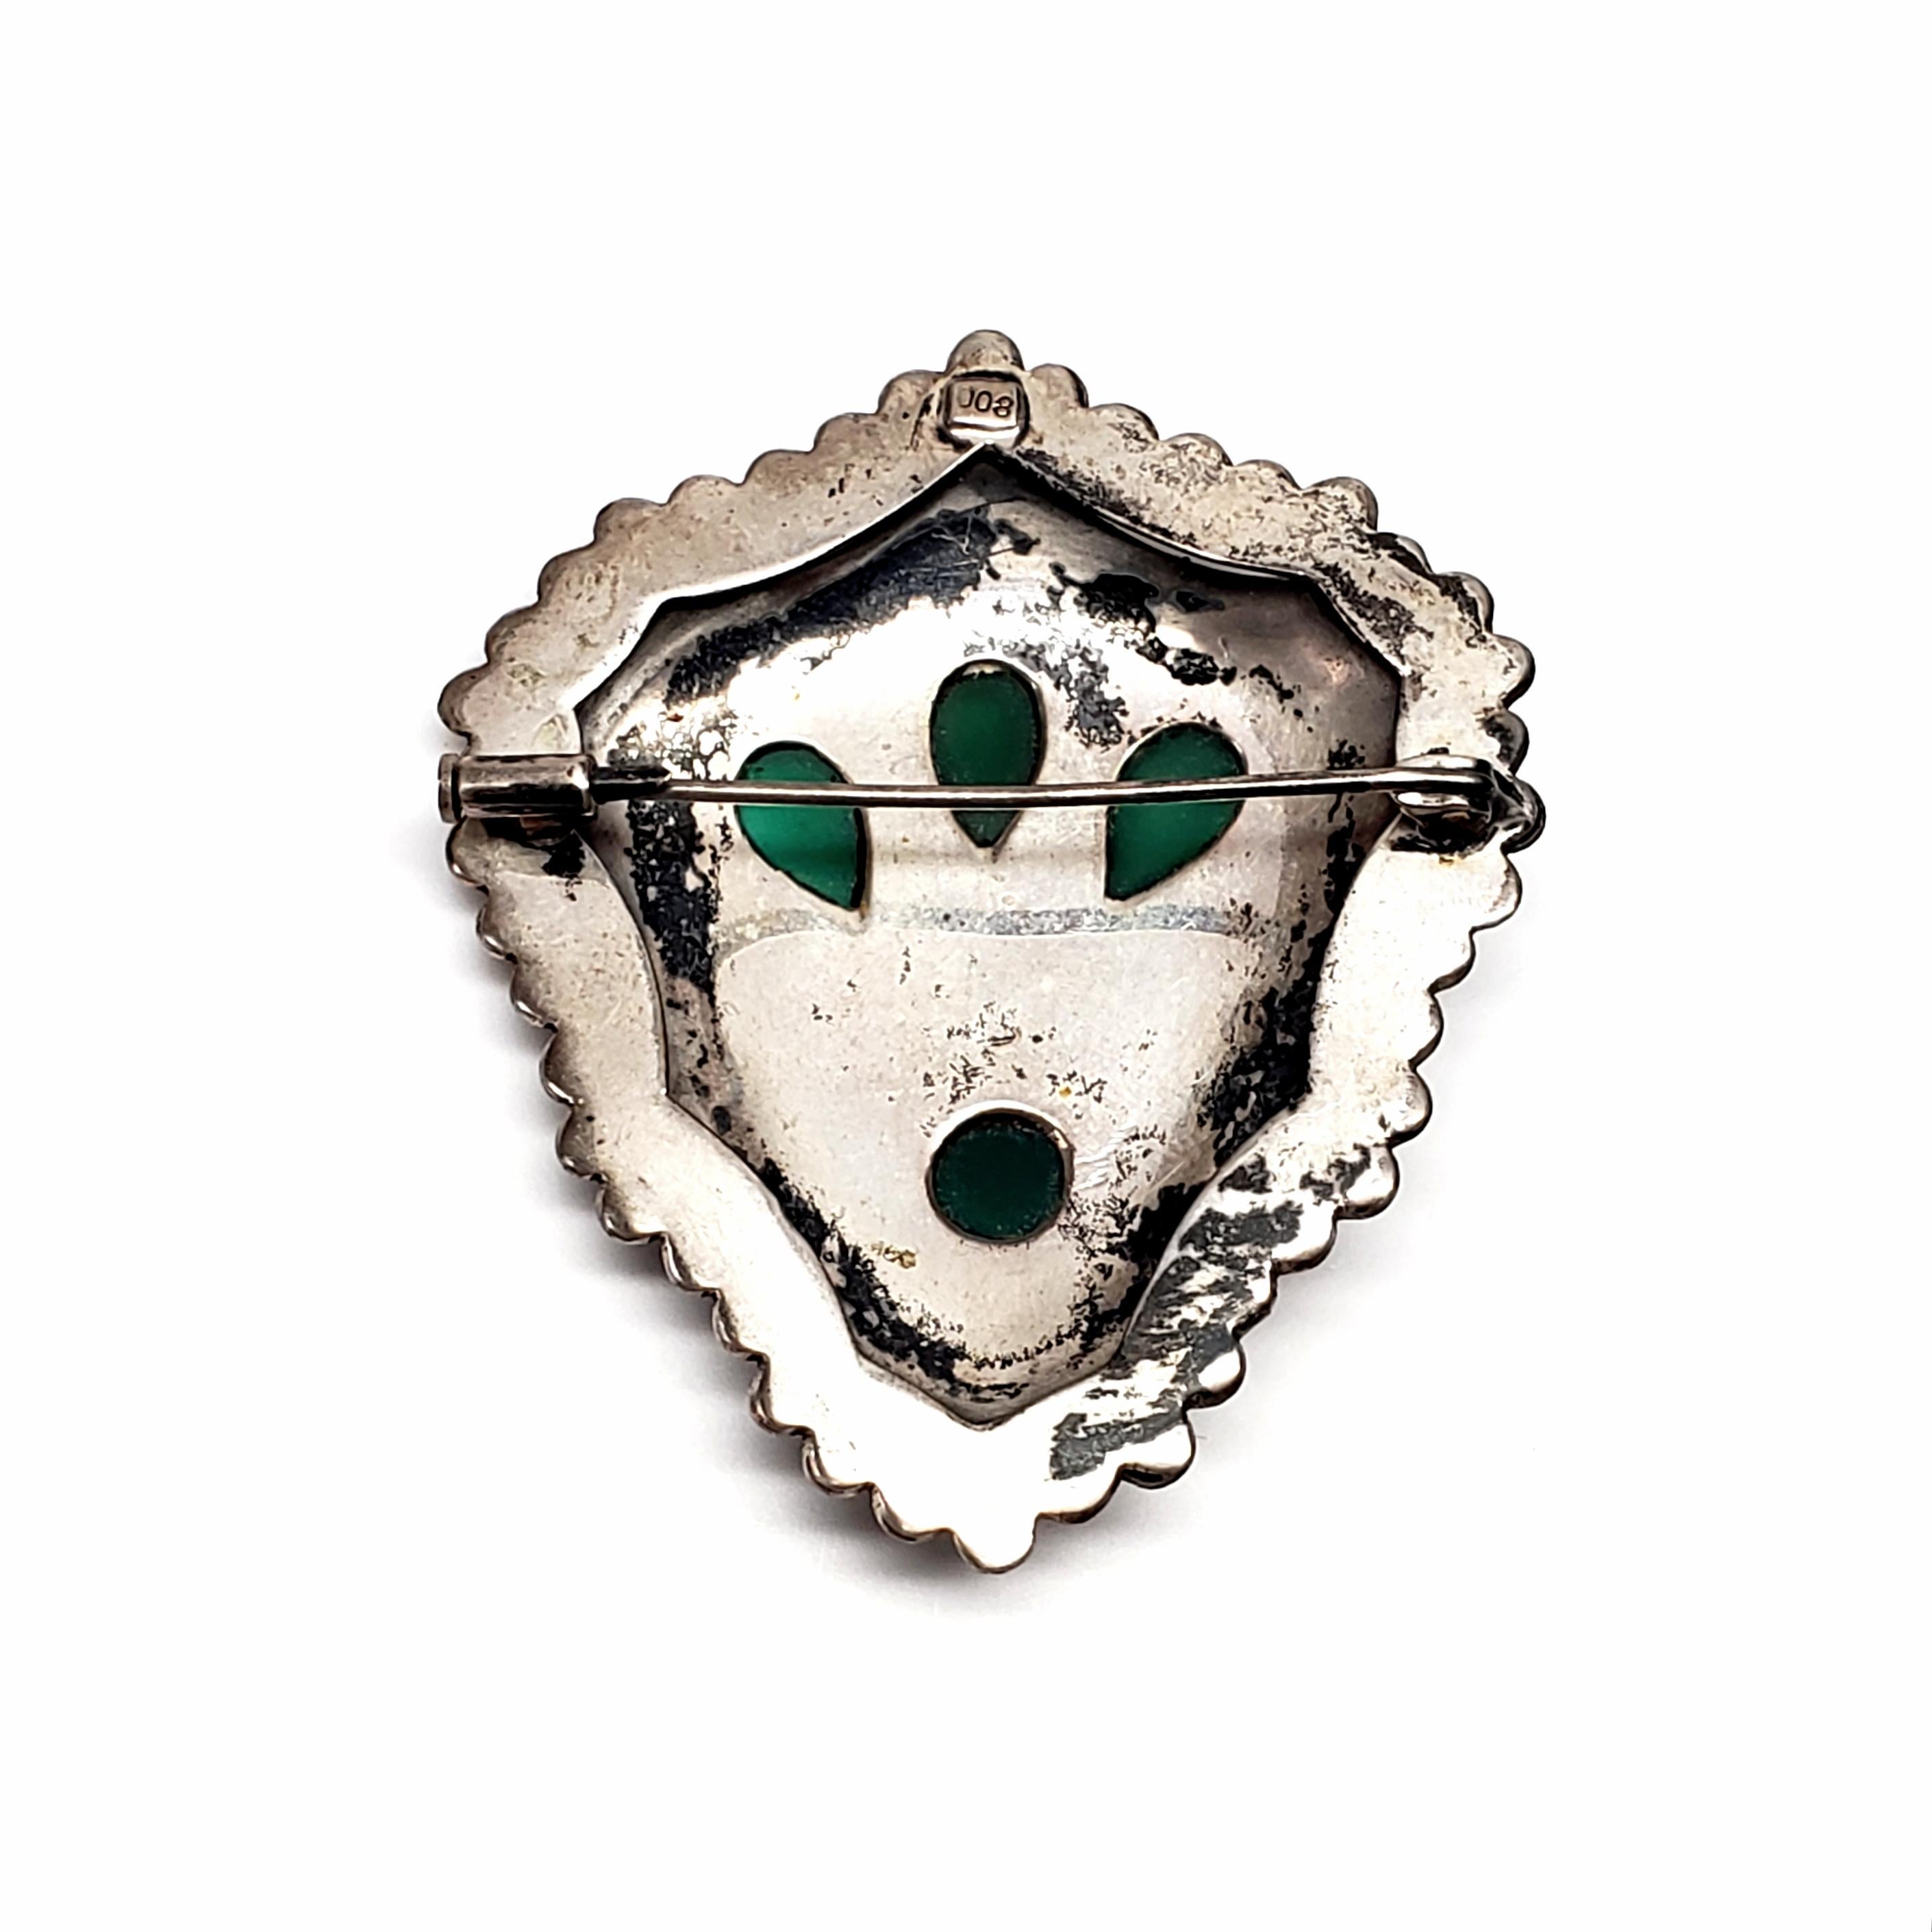 Vintage 800 silver and chrysoprase pin/brooch.

Large and ornately adorned pin with filigree and ball accents around 3 teardrop and 1 round chrysoprase cabochons.

Pin measures approx 2 1/4